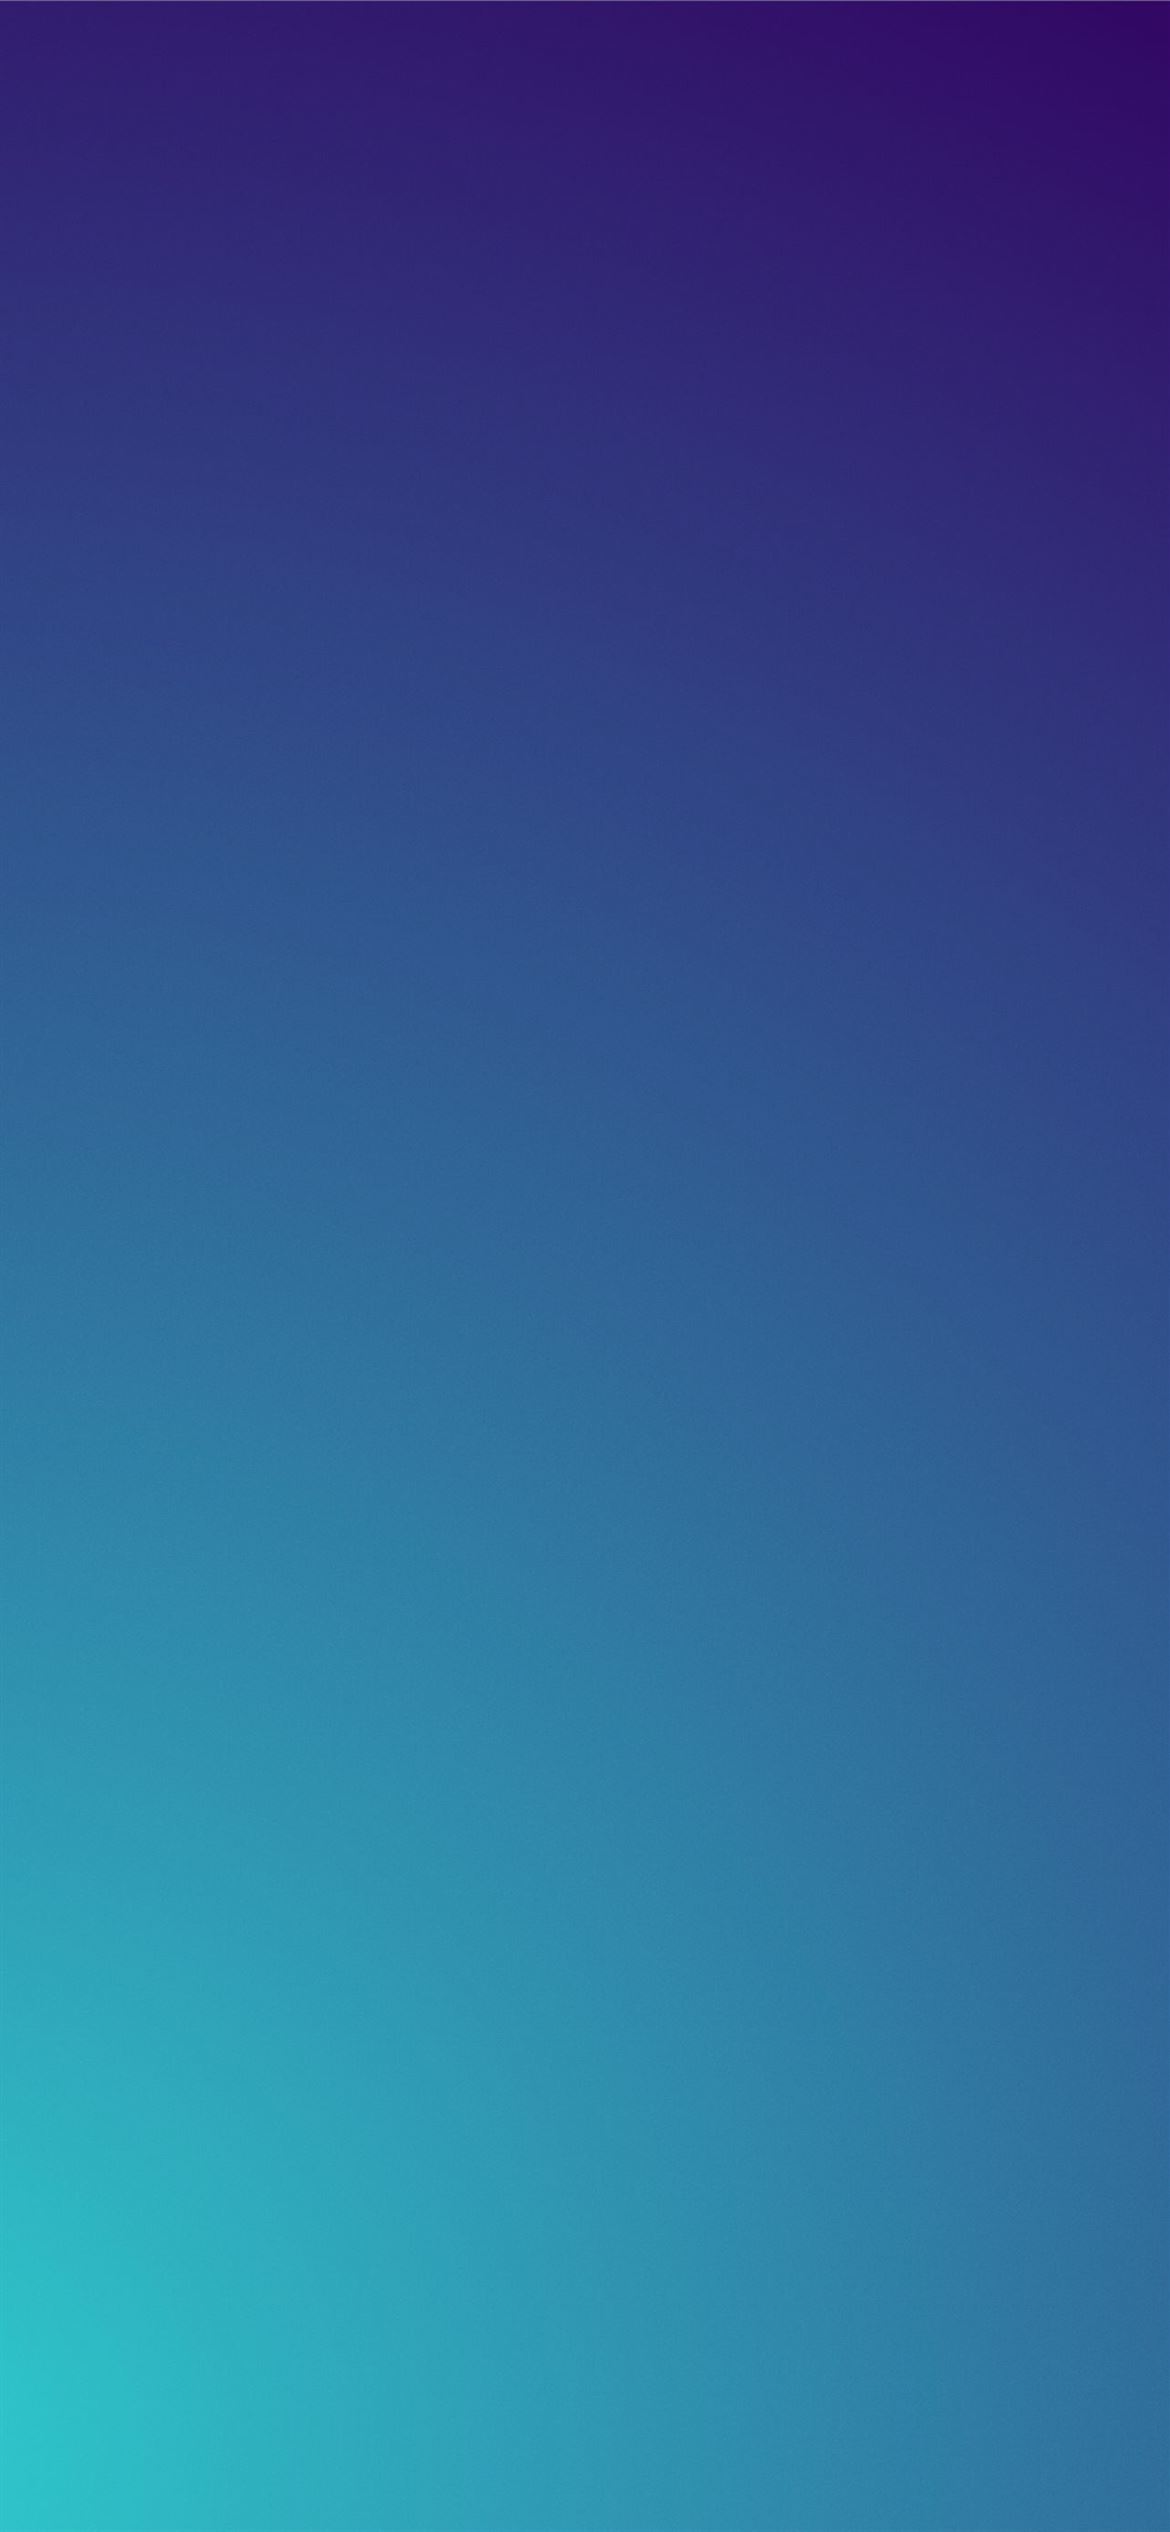 Light blue to dark blue gradient iPhone Wallpapers Free Download